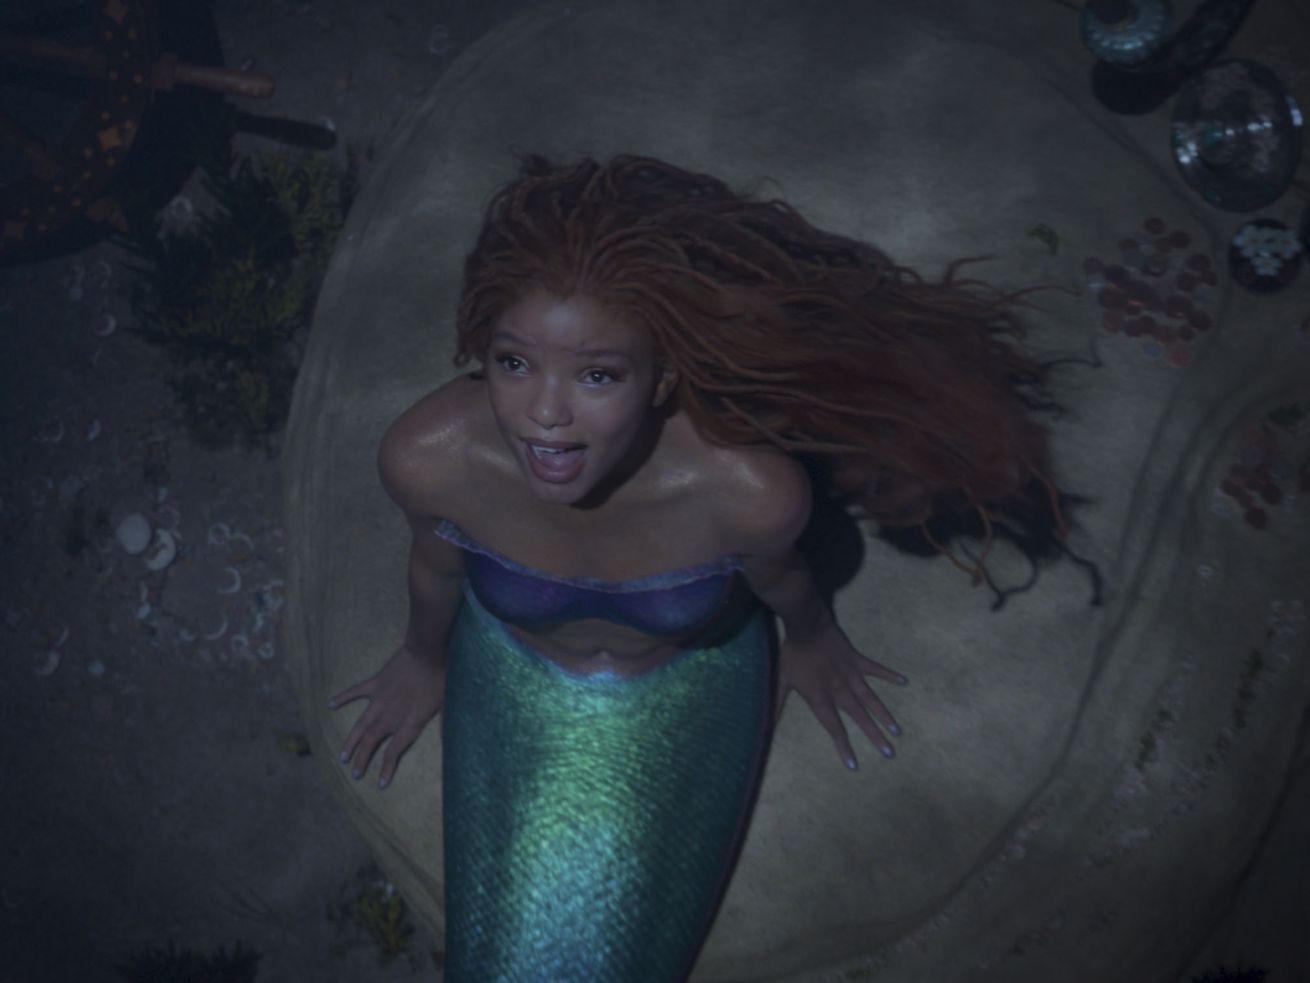 The racist backlash to The Little Mermaid and Lord of The Rings is exhausting and extremely predictable